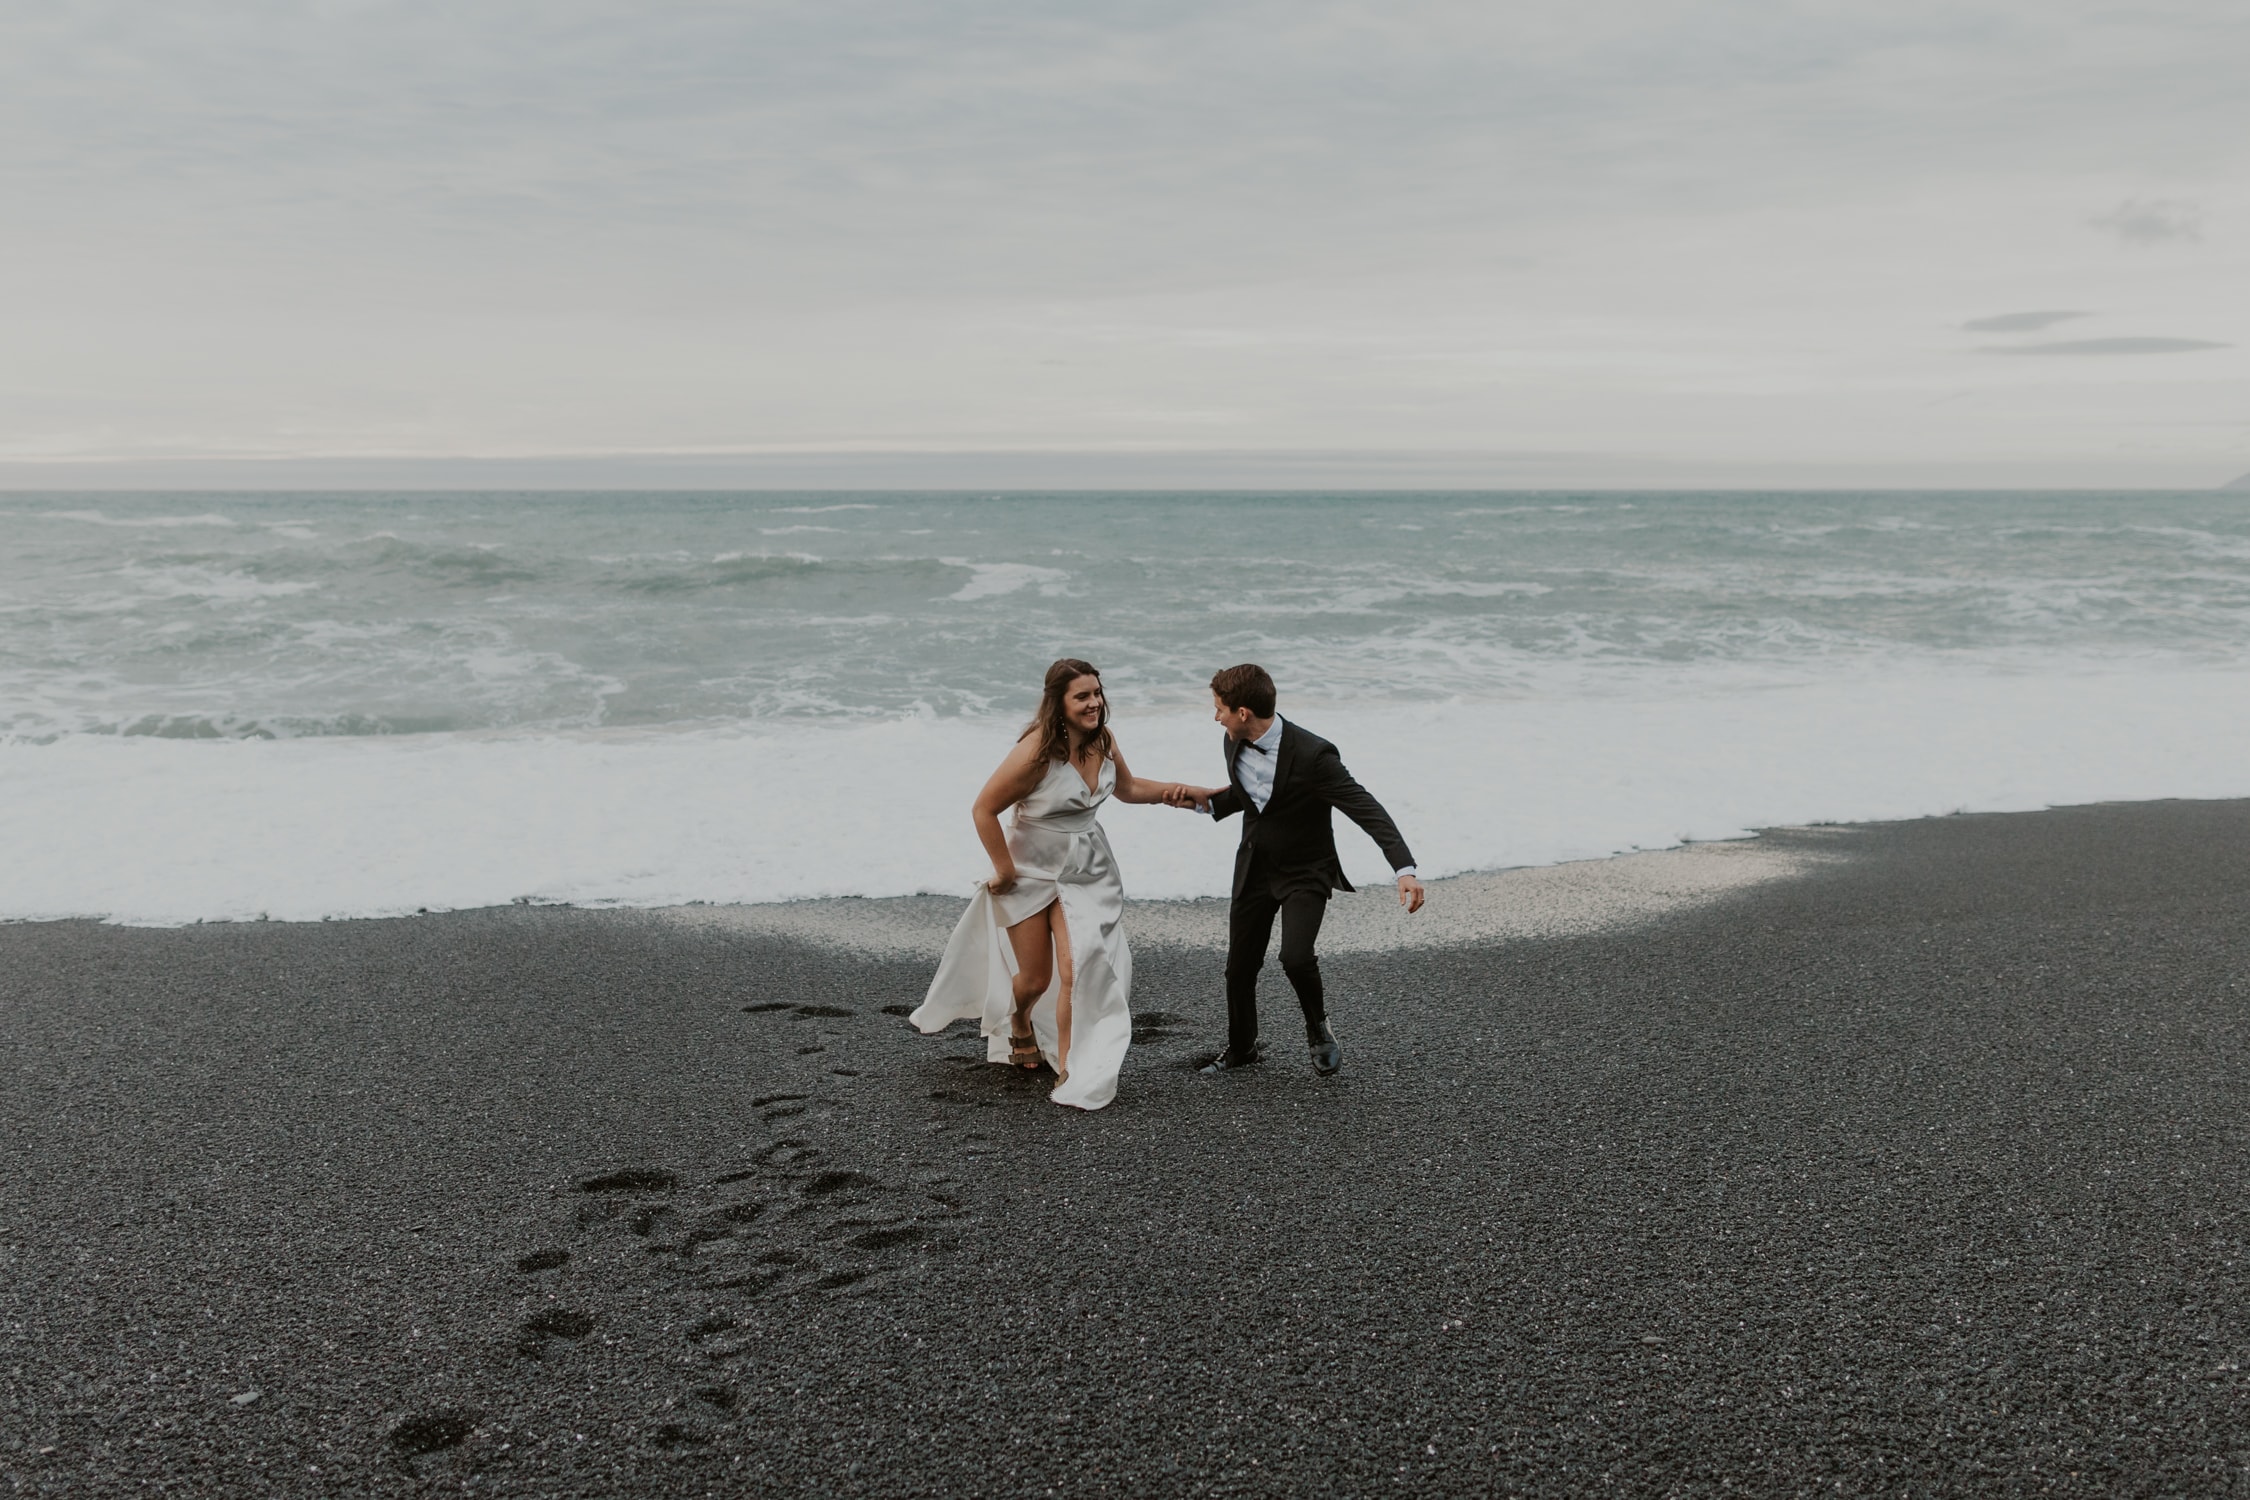 A couple in wedding attire holding hands and running towards the camera on a black sand beach in Northern California.